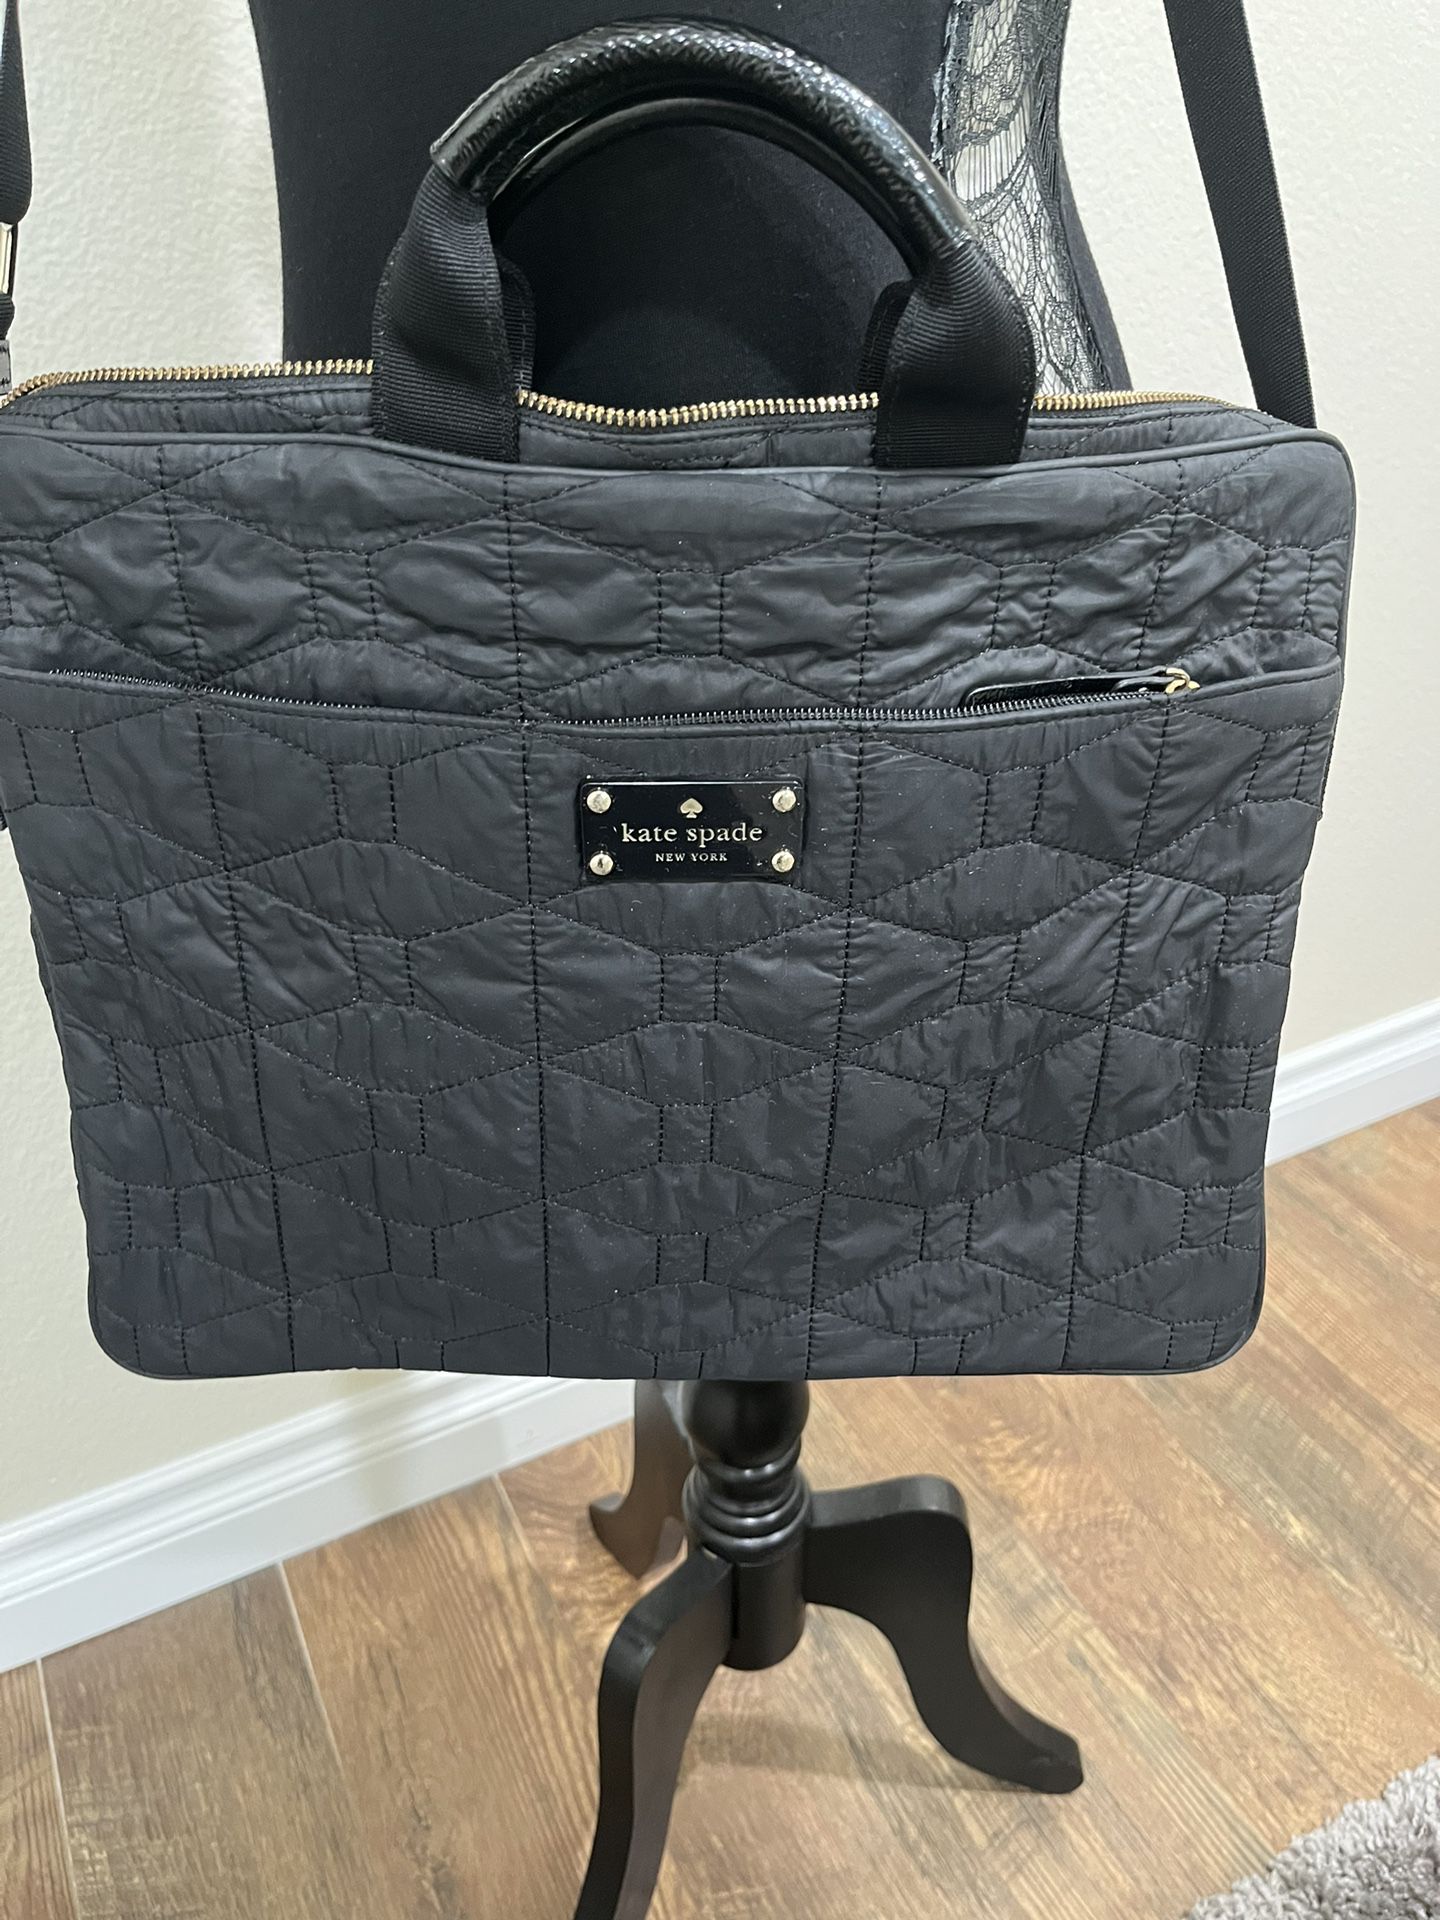 Kate Spade ♠️ New York Black Nylon Quilted Satchel 